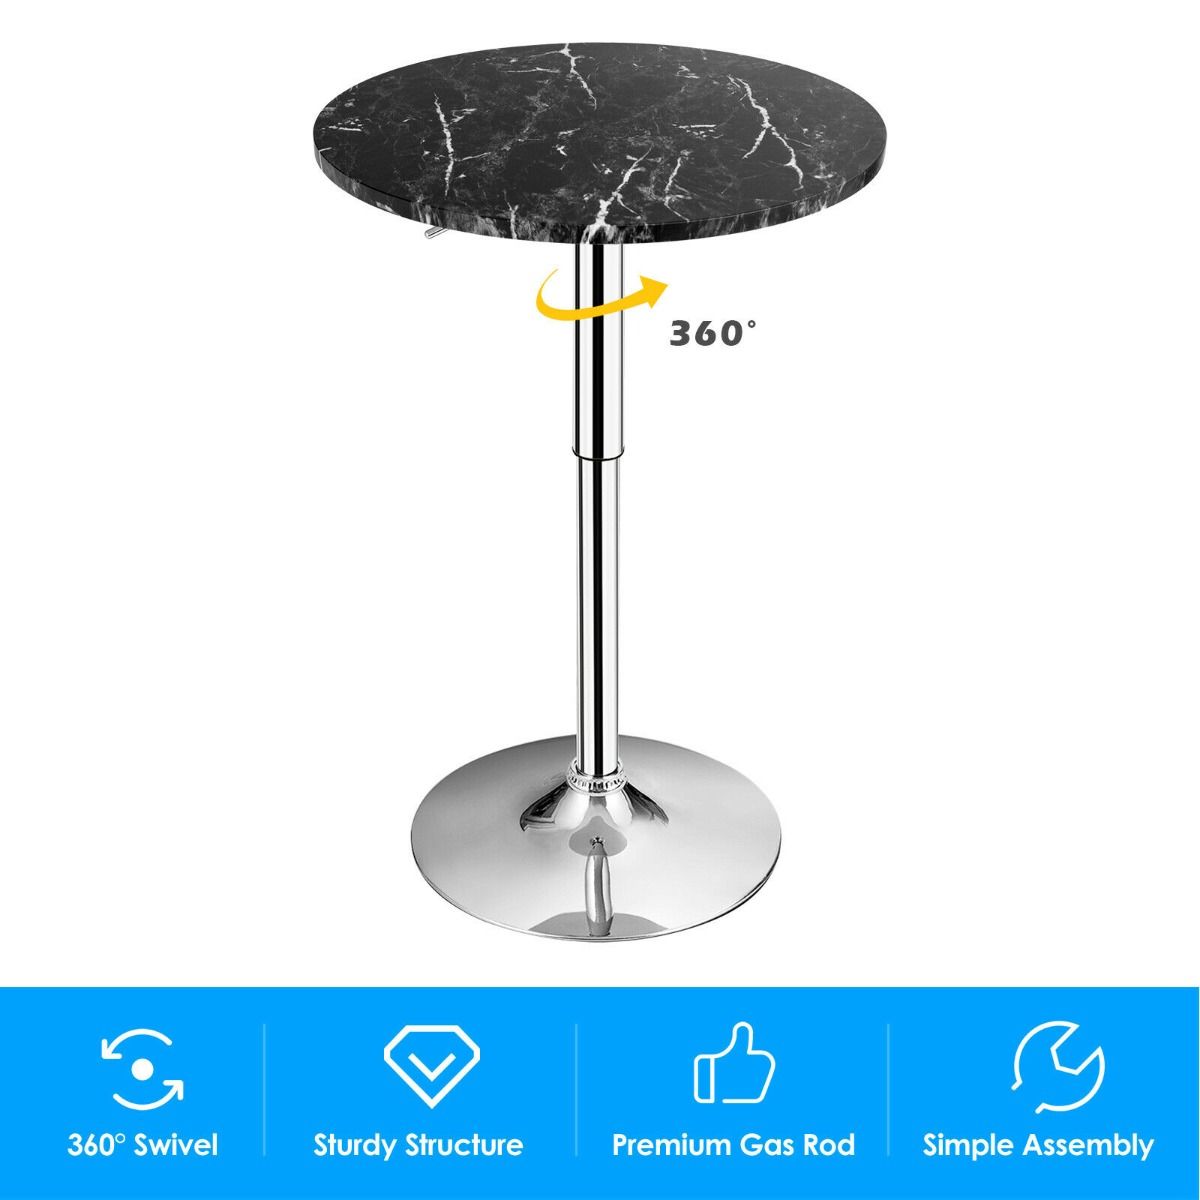 Modern Round Marble Bar Table with Silver Leg and Base - Black